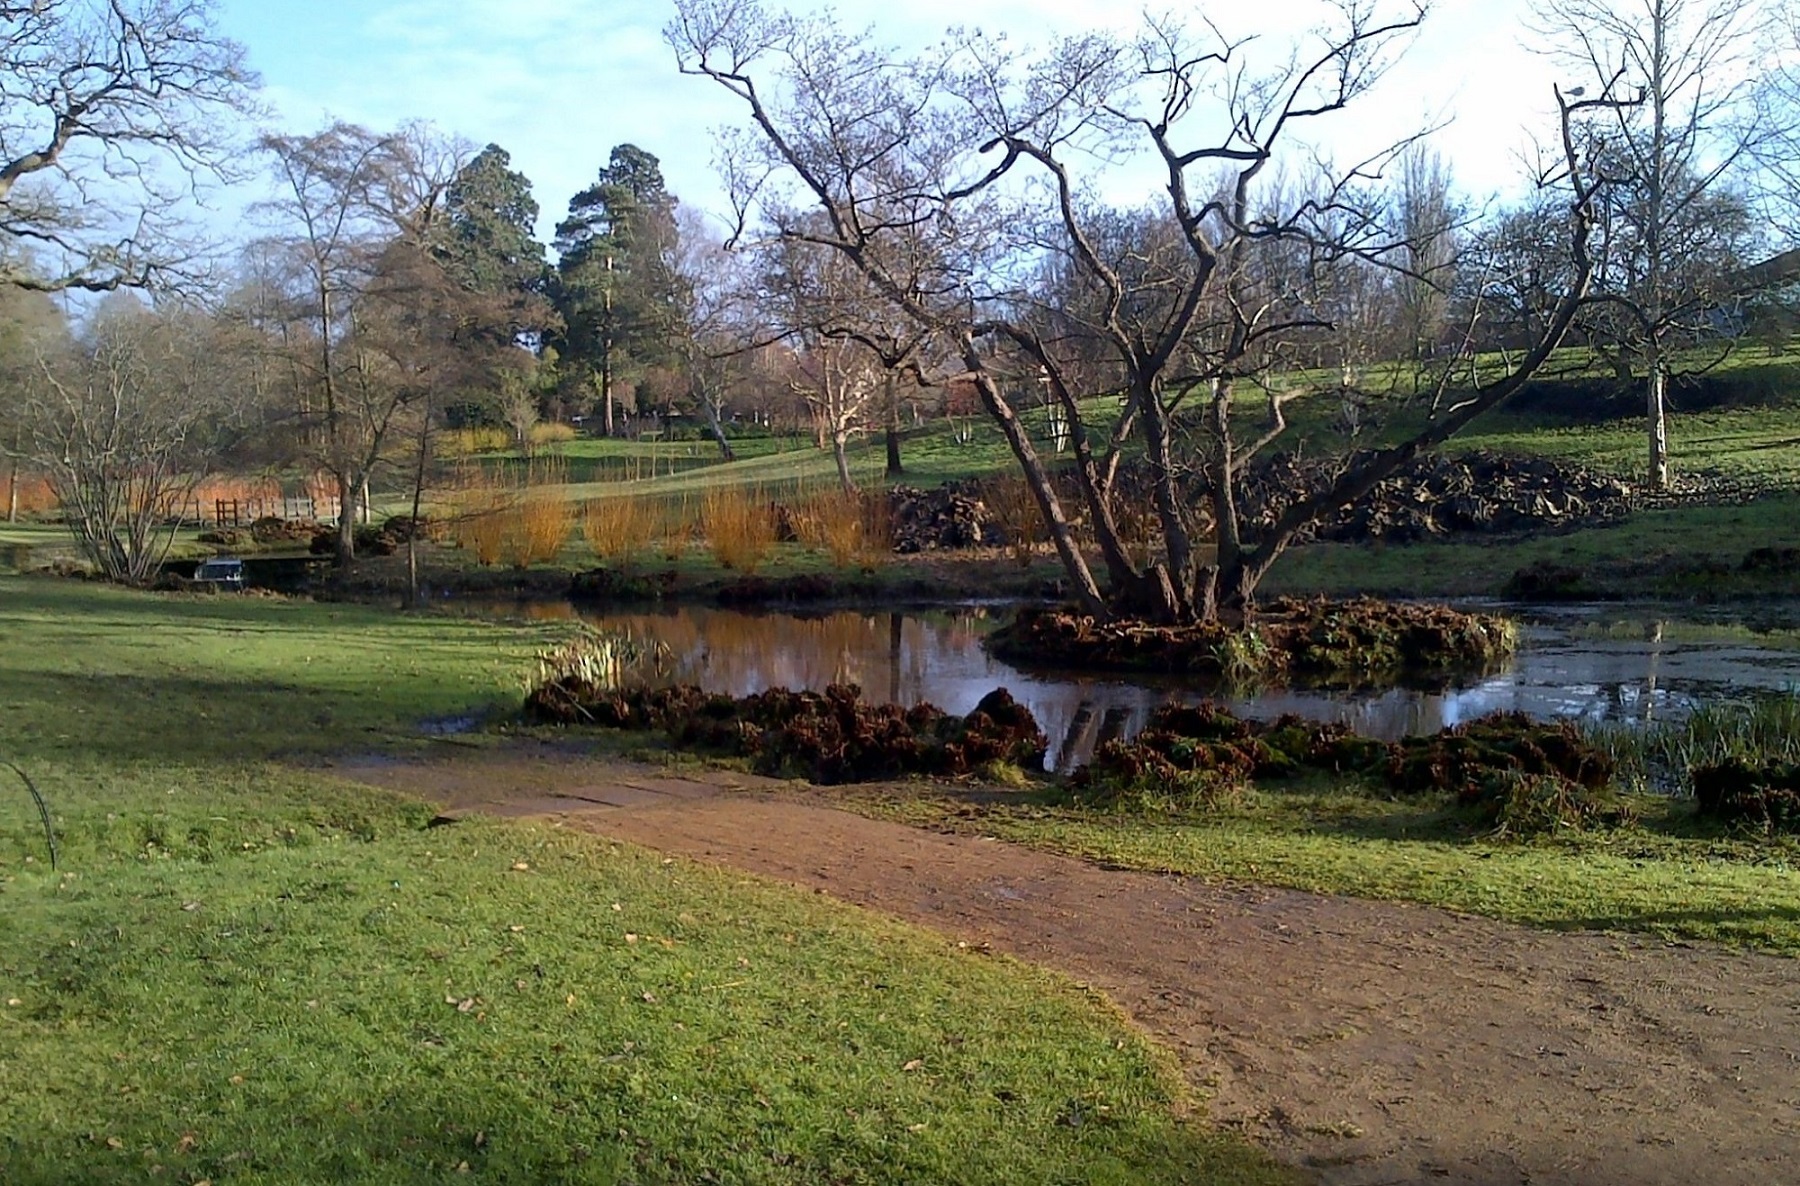 Sunny winter day in a large landscaped garden, with small pound and island in the foreground, and grassland sloping up to the right in the background.